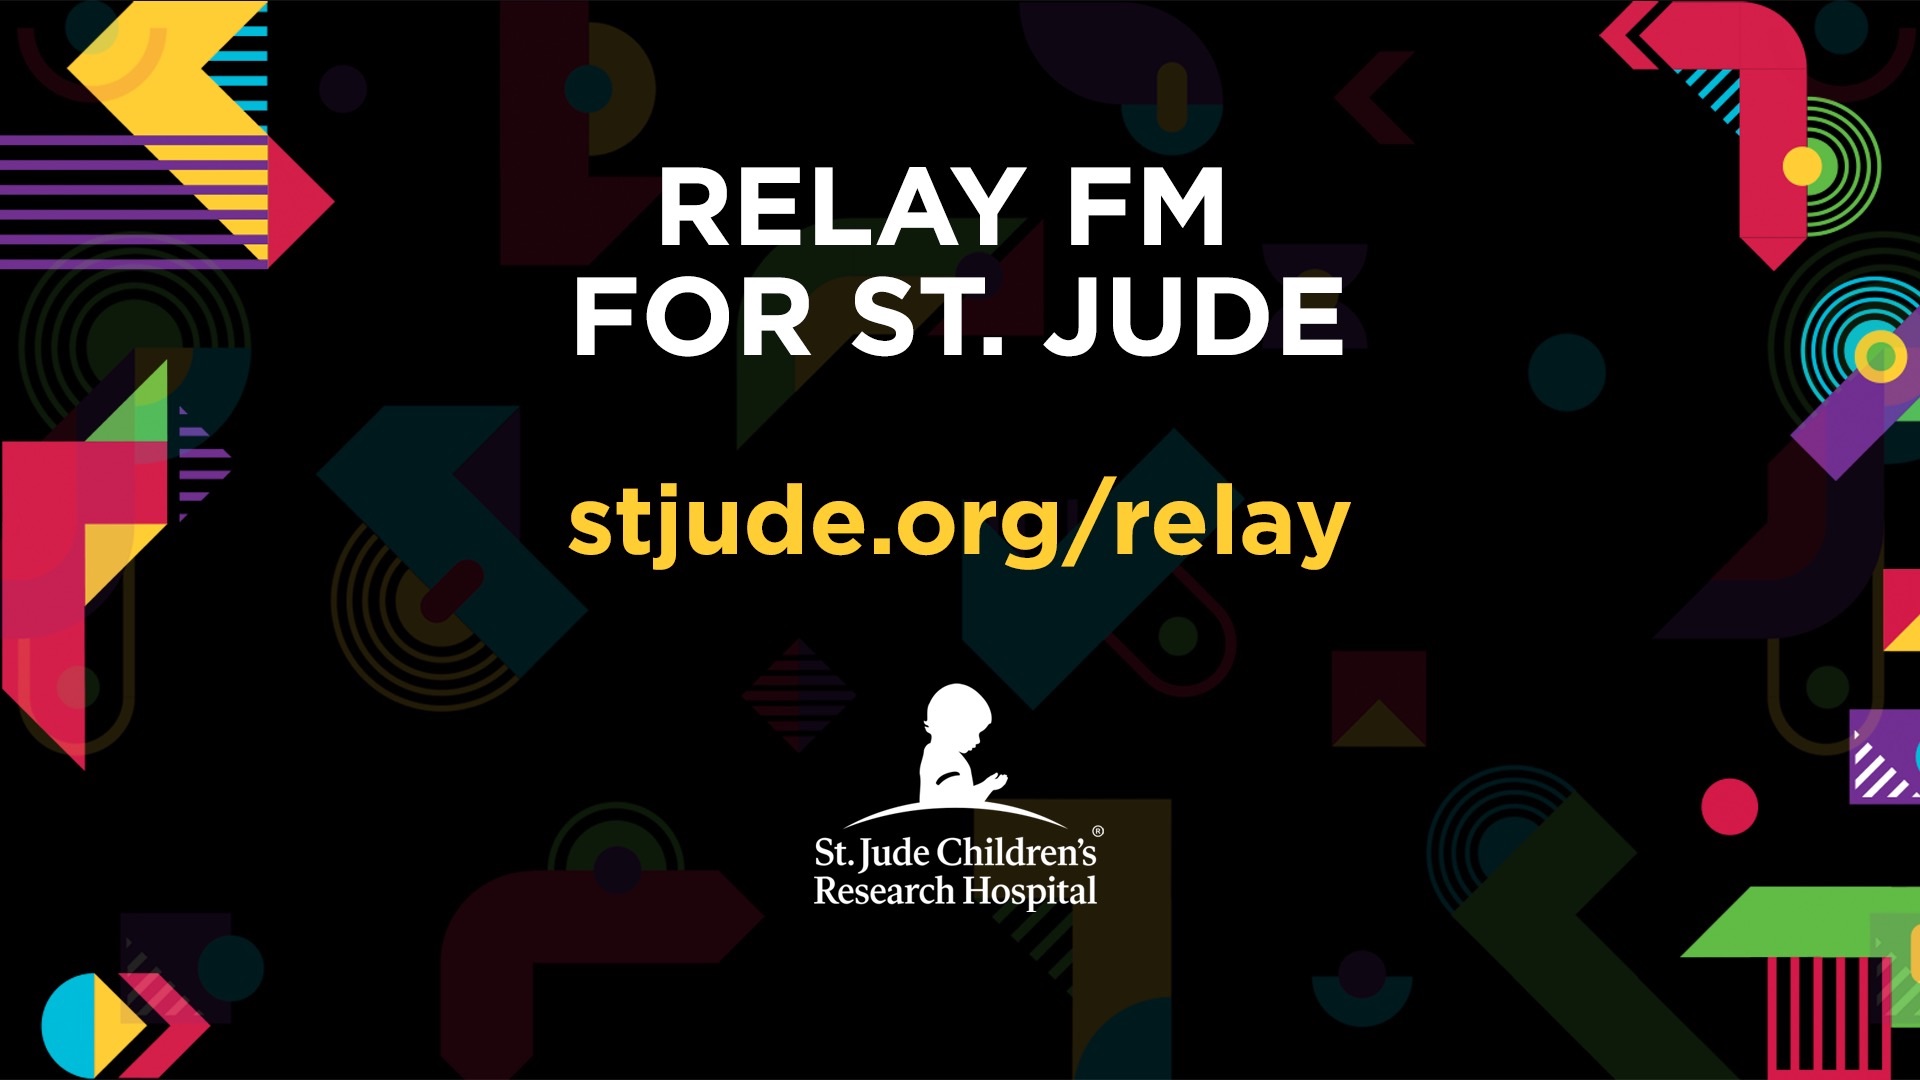 Relay FM Launches Fundraiser for St. Jude Children's Research Hospital